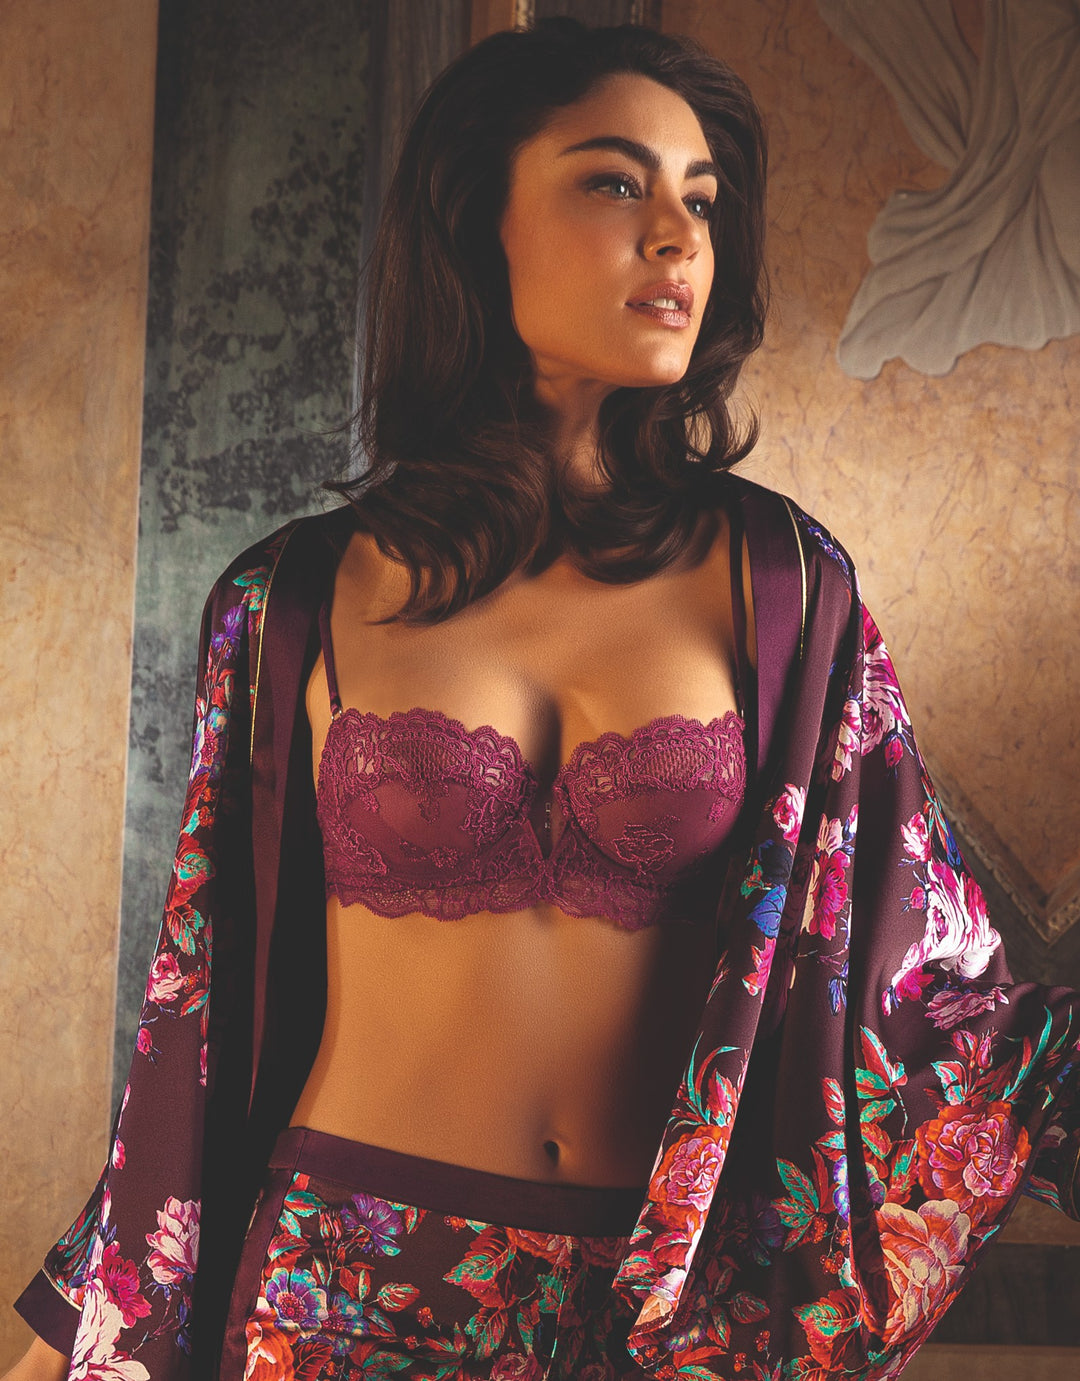 Fuchsia Floral Lace Underwired Cup Size Bra